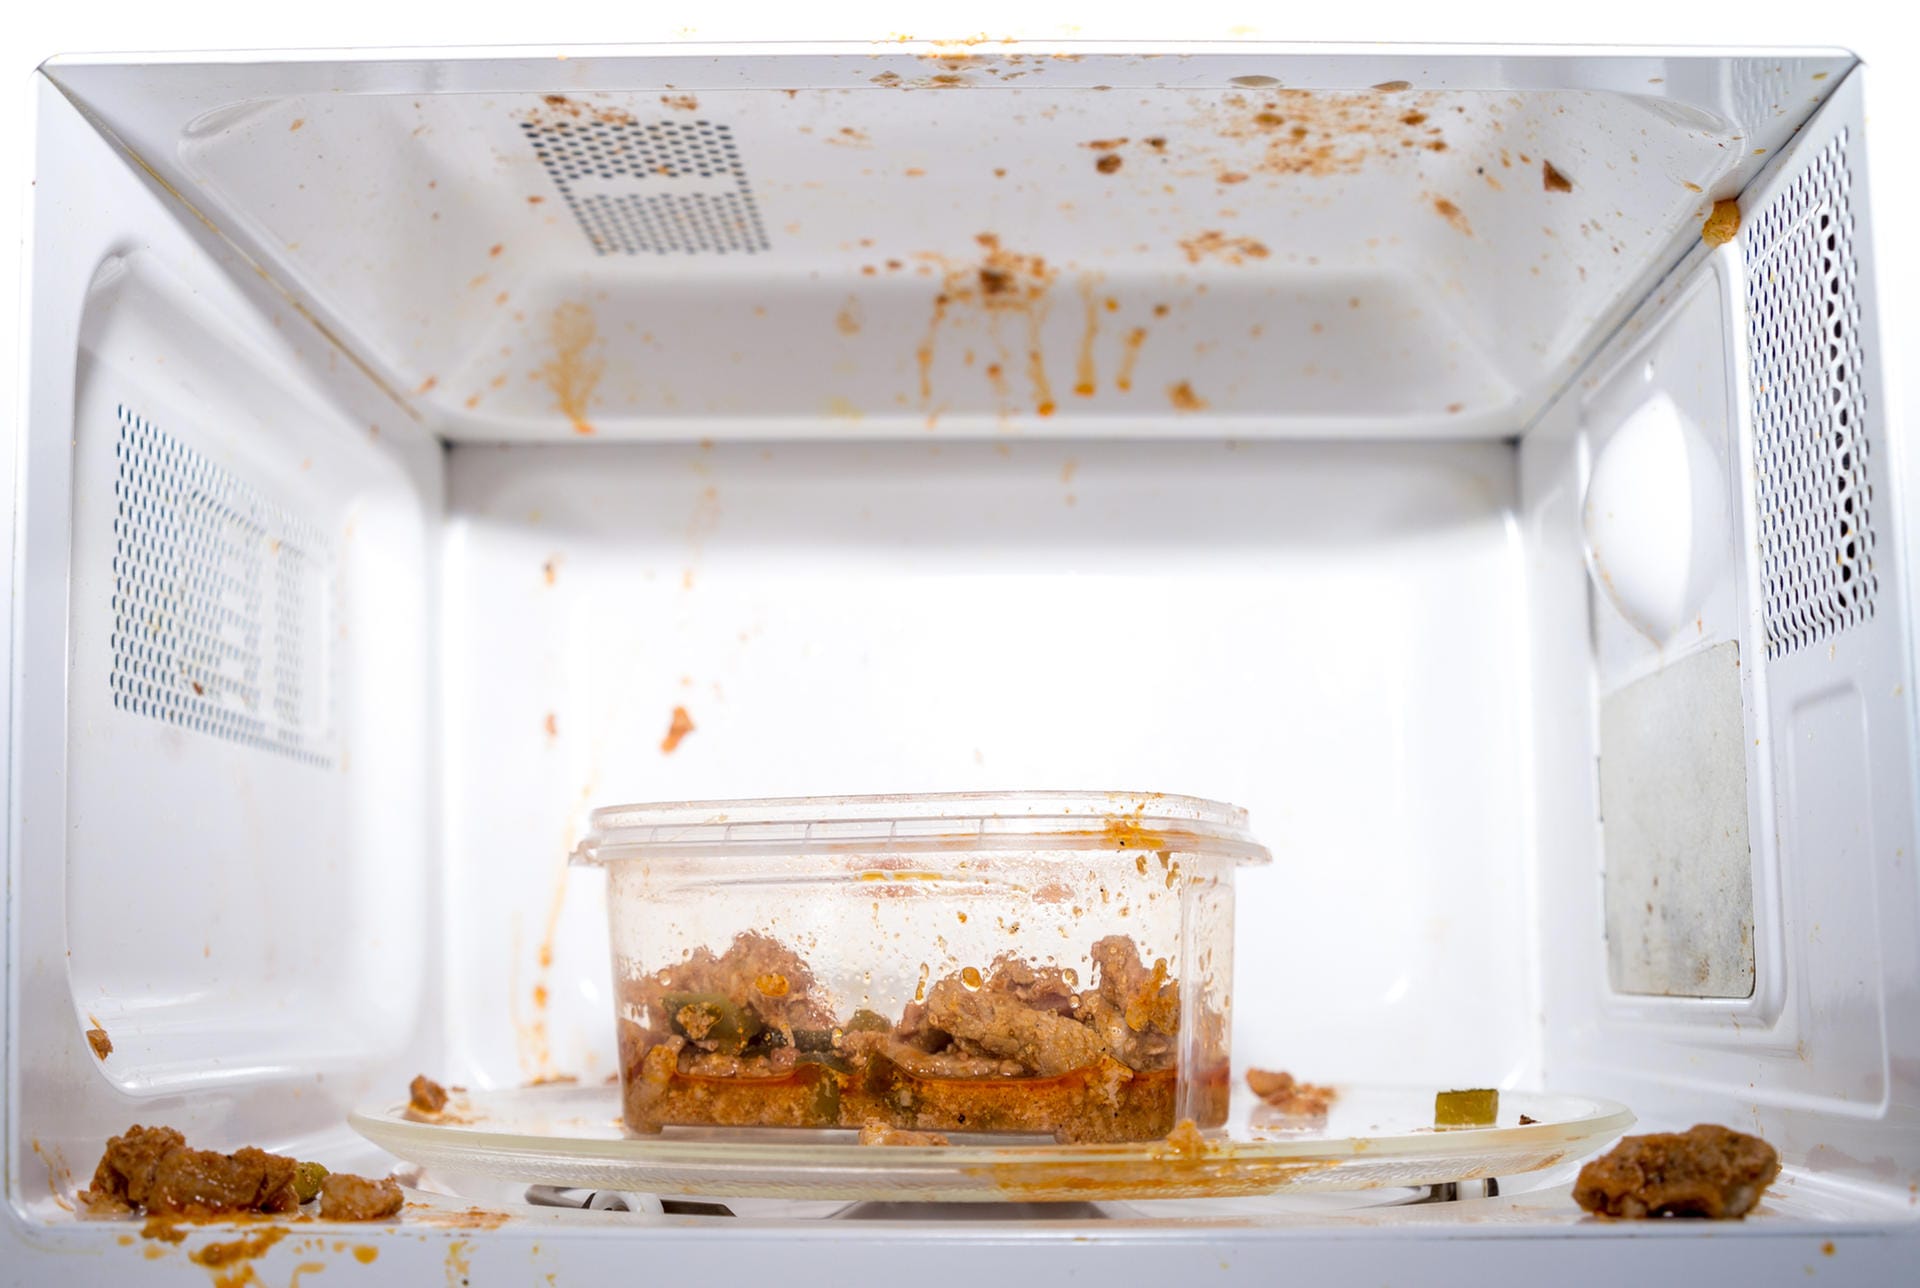 Food exploded in microwave oven